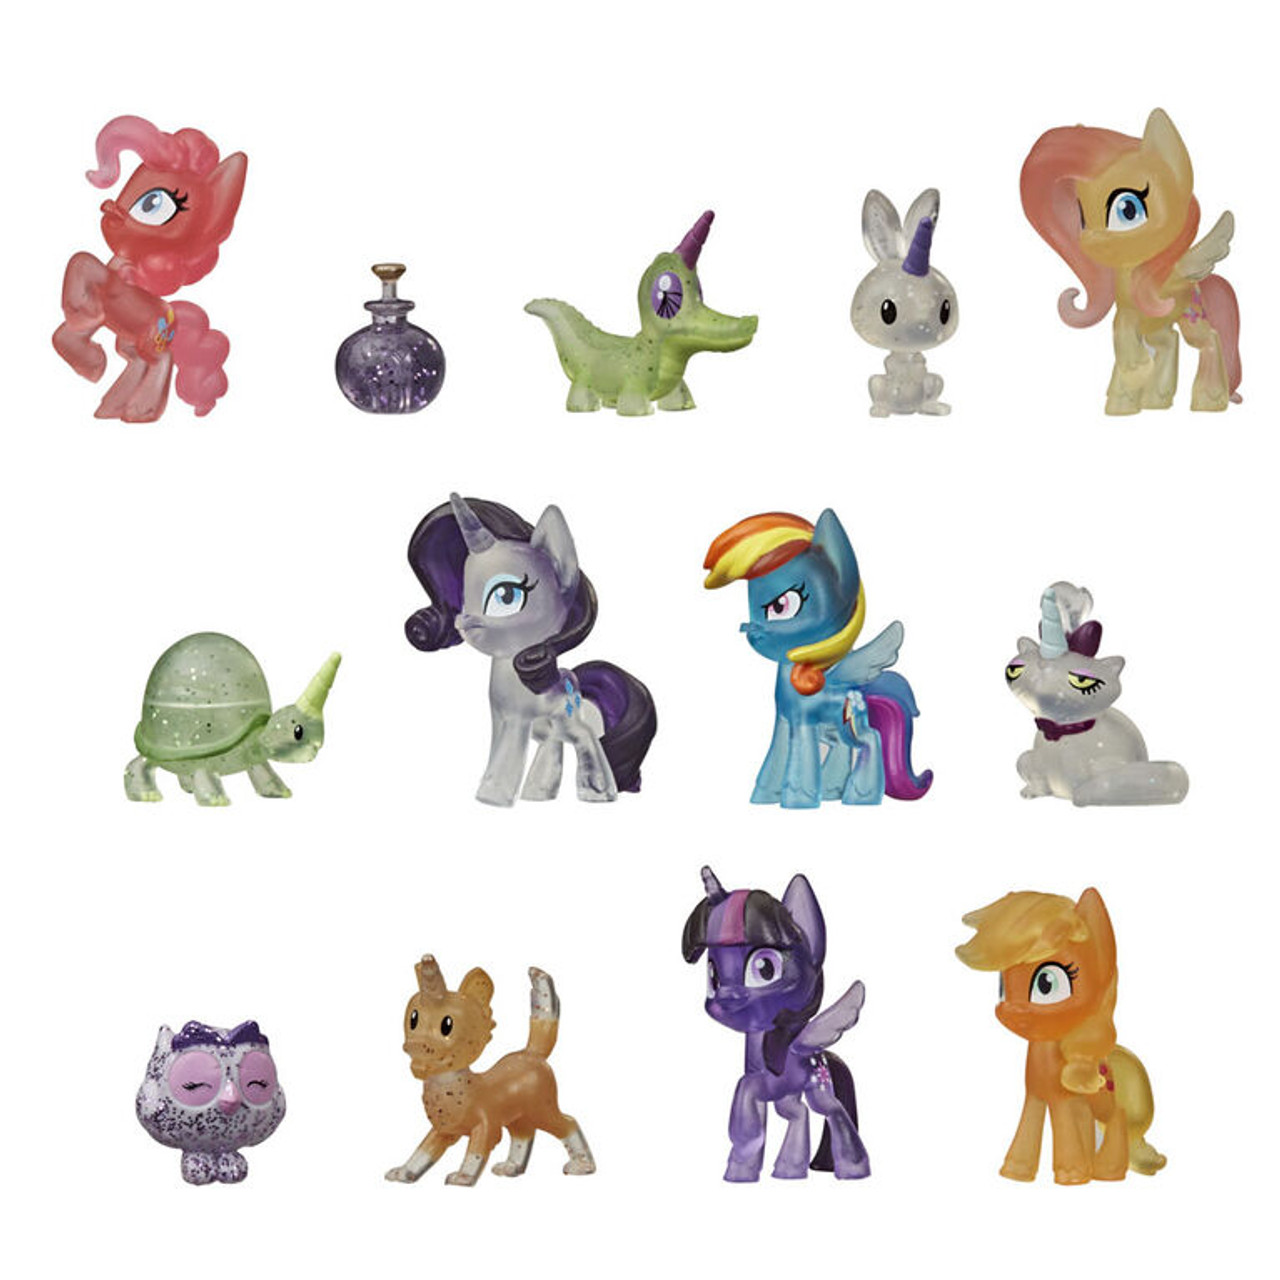 Equestria Daily - MLP Stuff!: New Toy Set My Little Pony Dragon Light  Reveal Features Blaize Skysong the Dragon